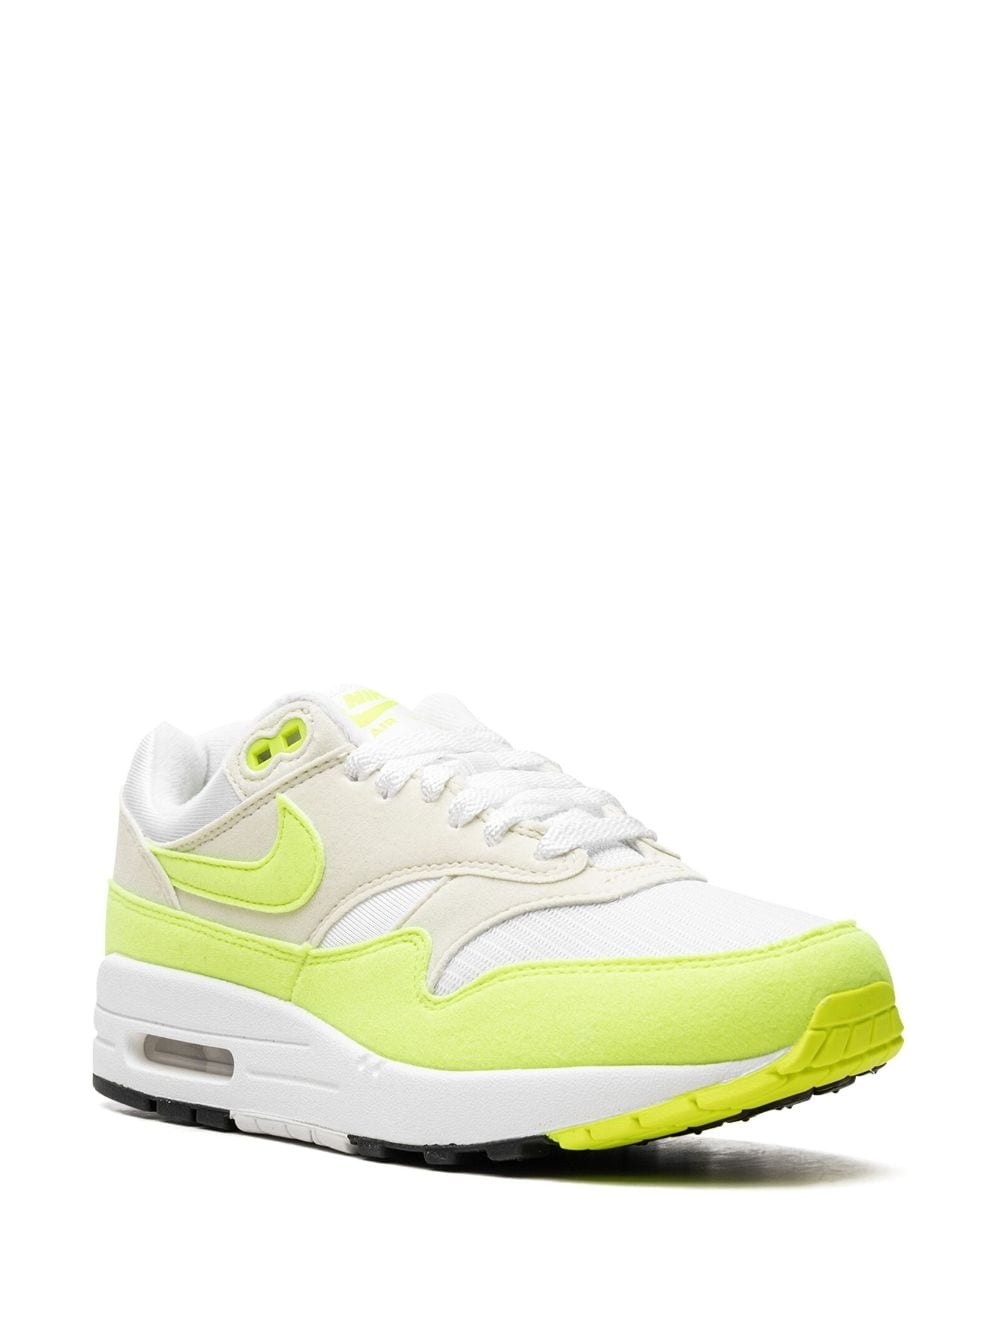 Air Max 1 "Volt Suede" sneakers - 2